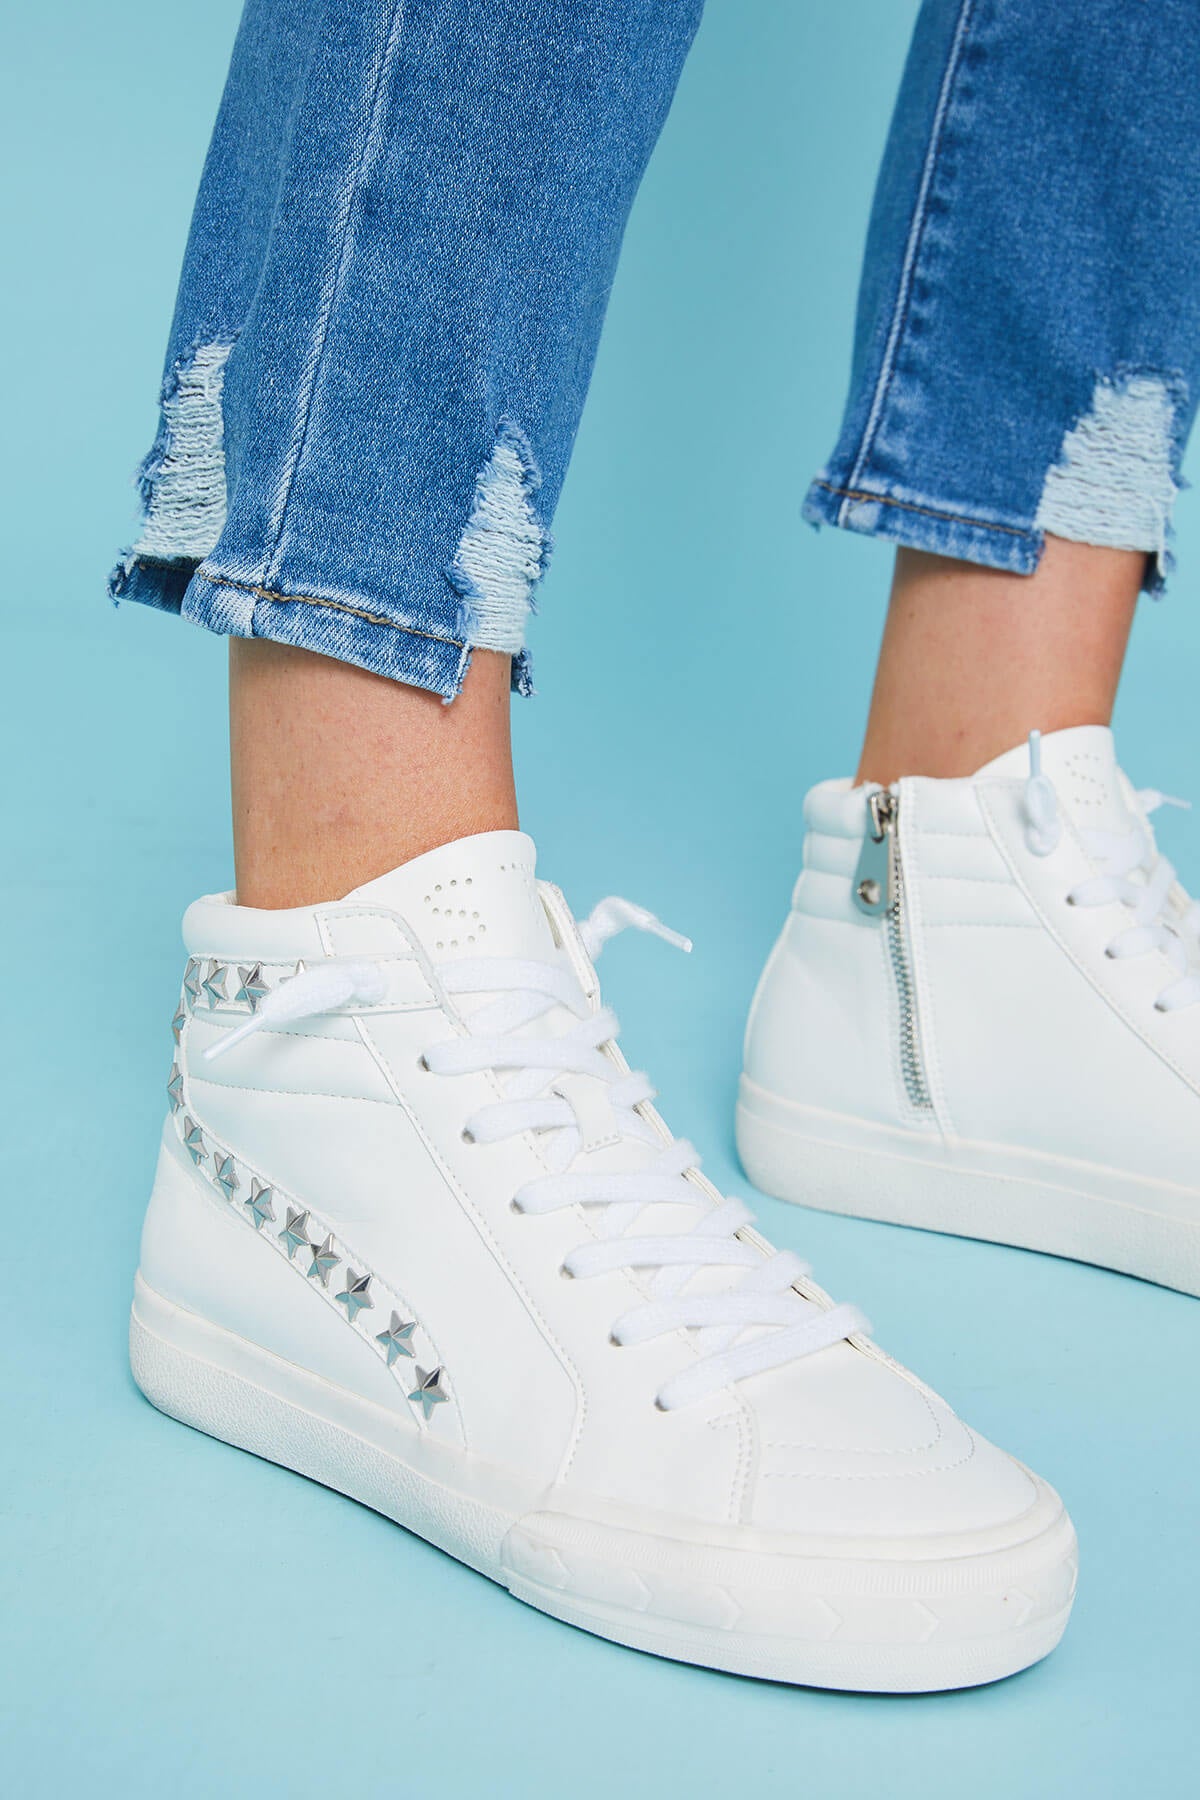 WOMENS LADIES ZIP STUDDED HIGH TOP ANKLE TRAINERS PARTY SNEAKERS WOMEN SHOES